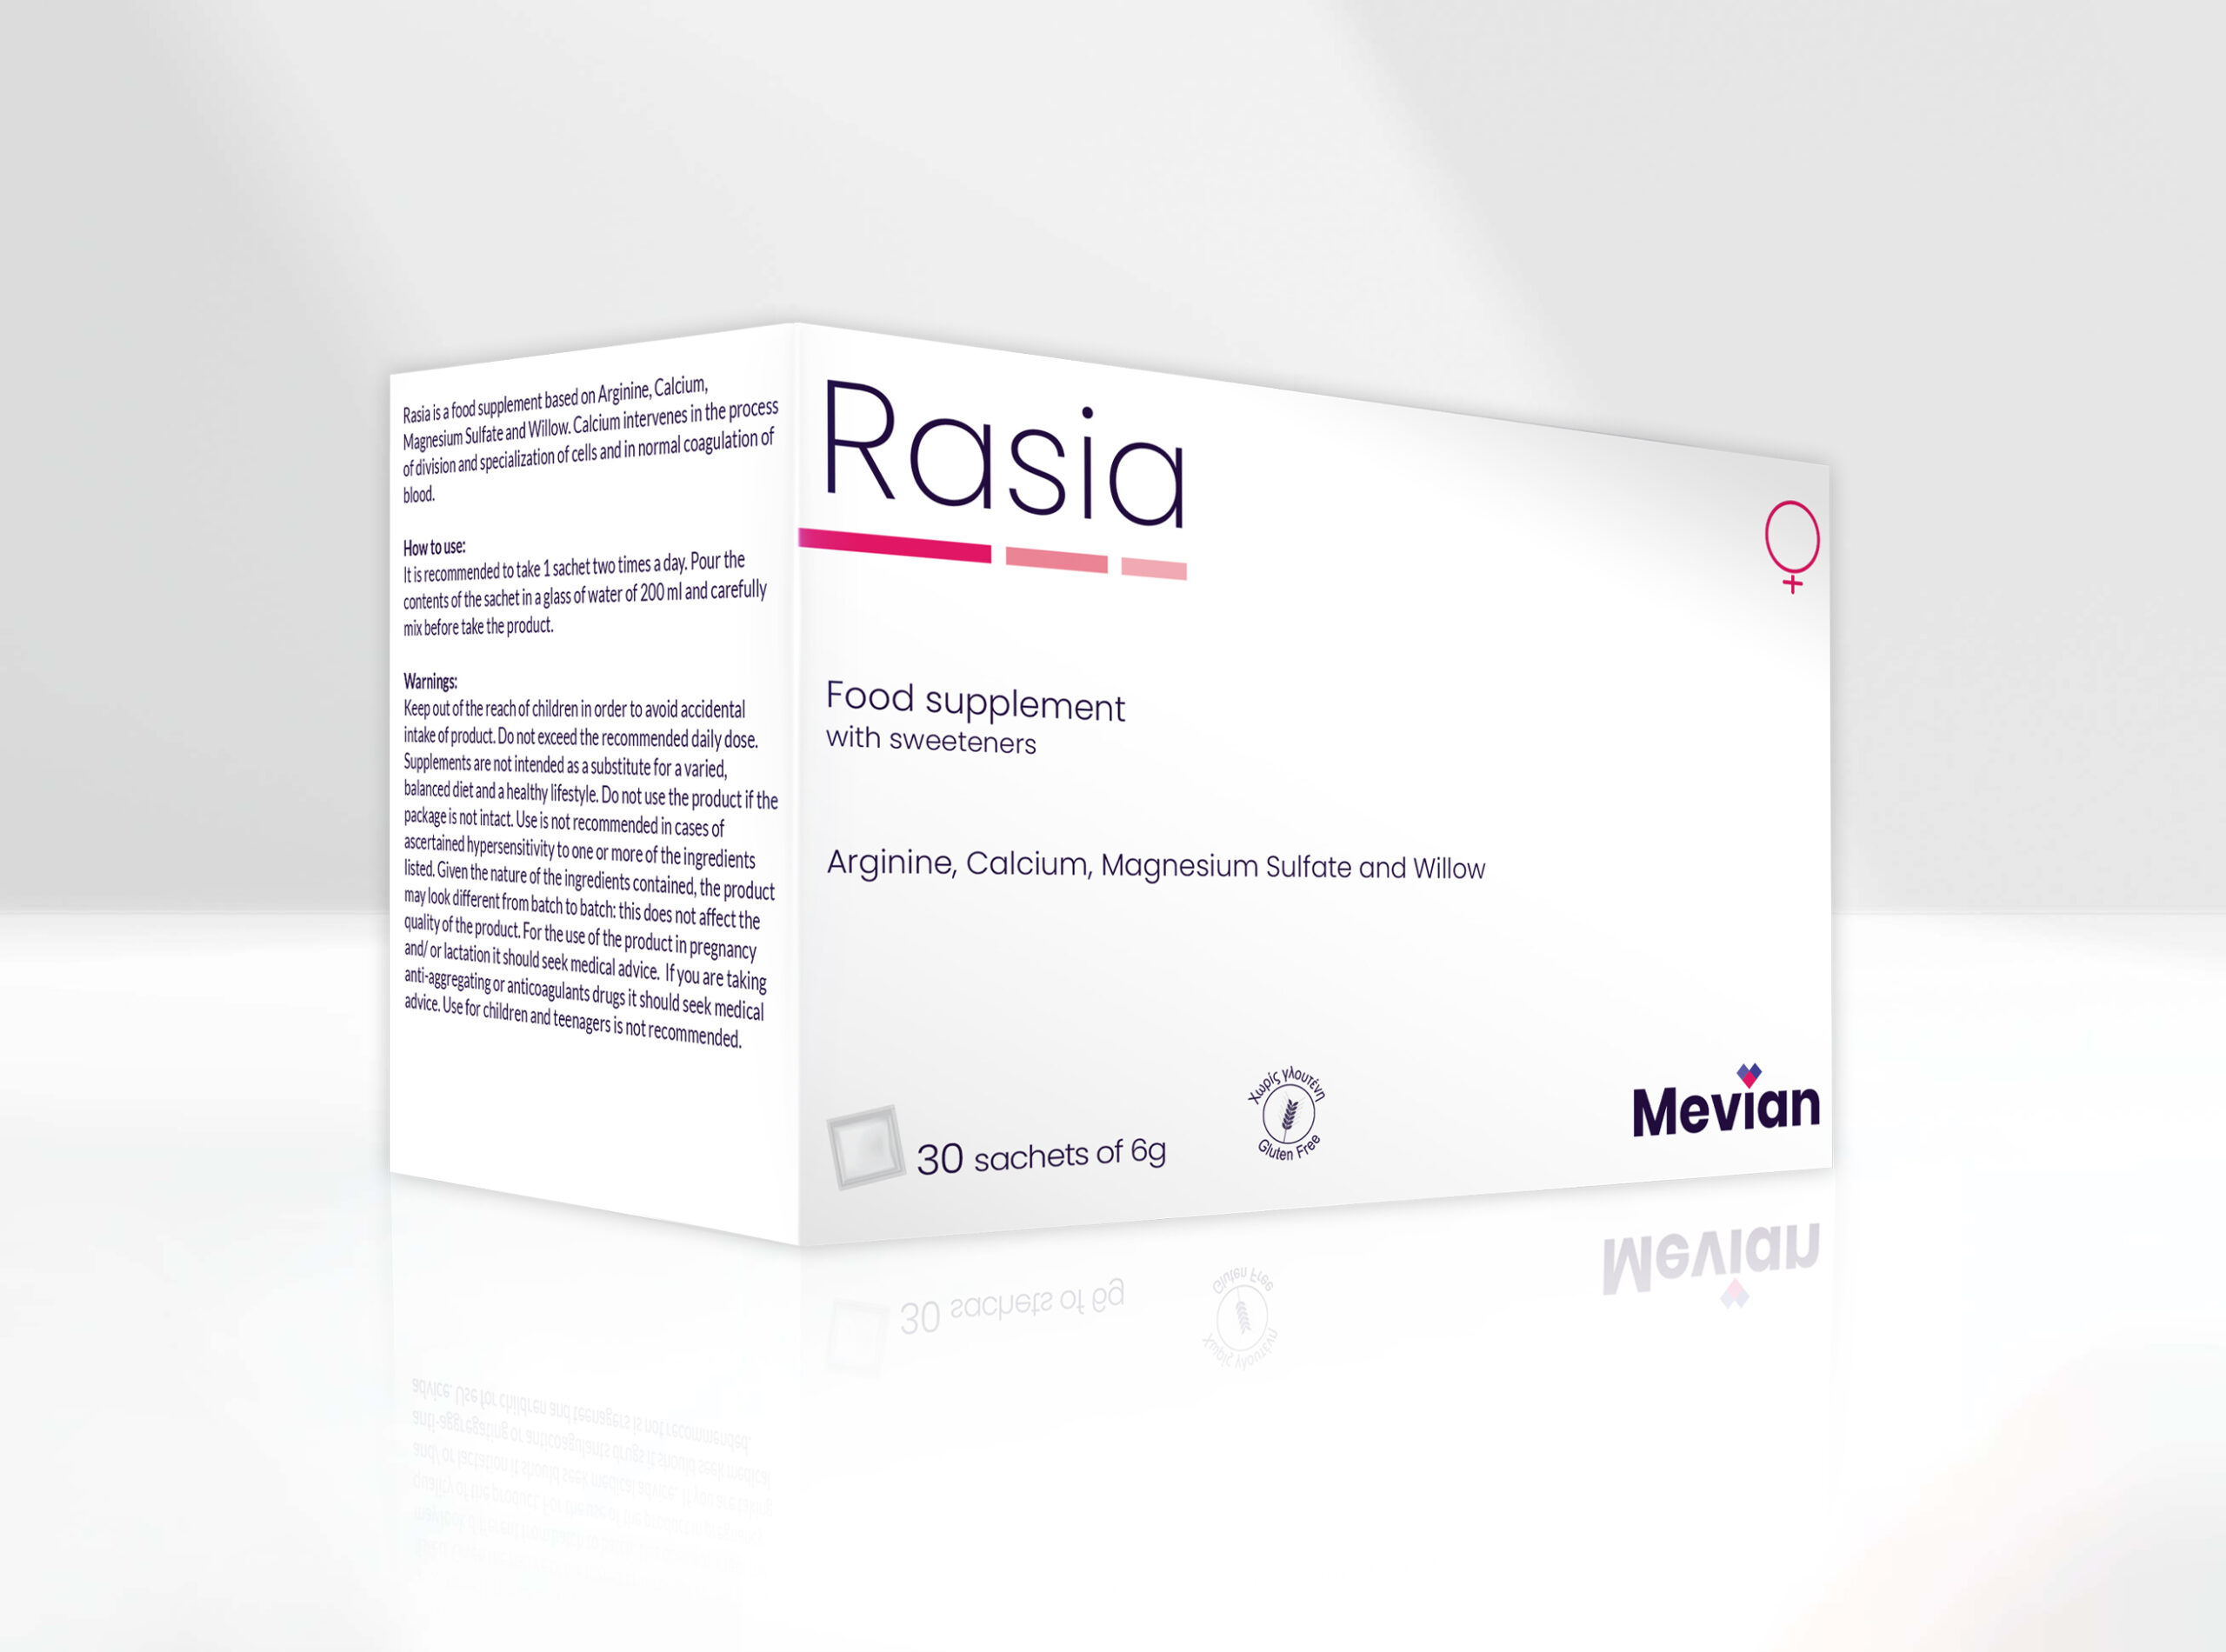 Rasia is a supportive product that helps the process of division and specialization of cells and in normal coagulation of blood. Indicated for Preeclampsia, and prevention of preterm birth.